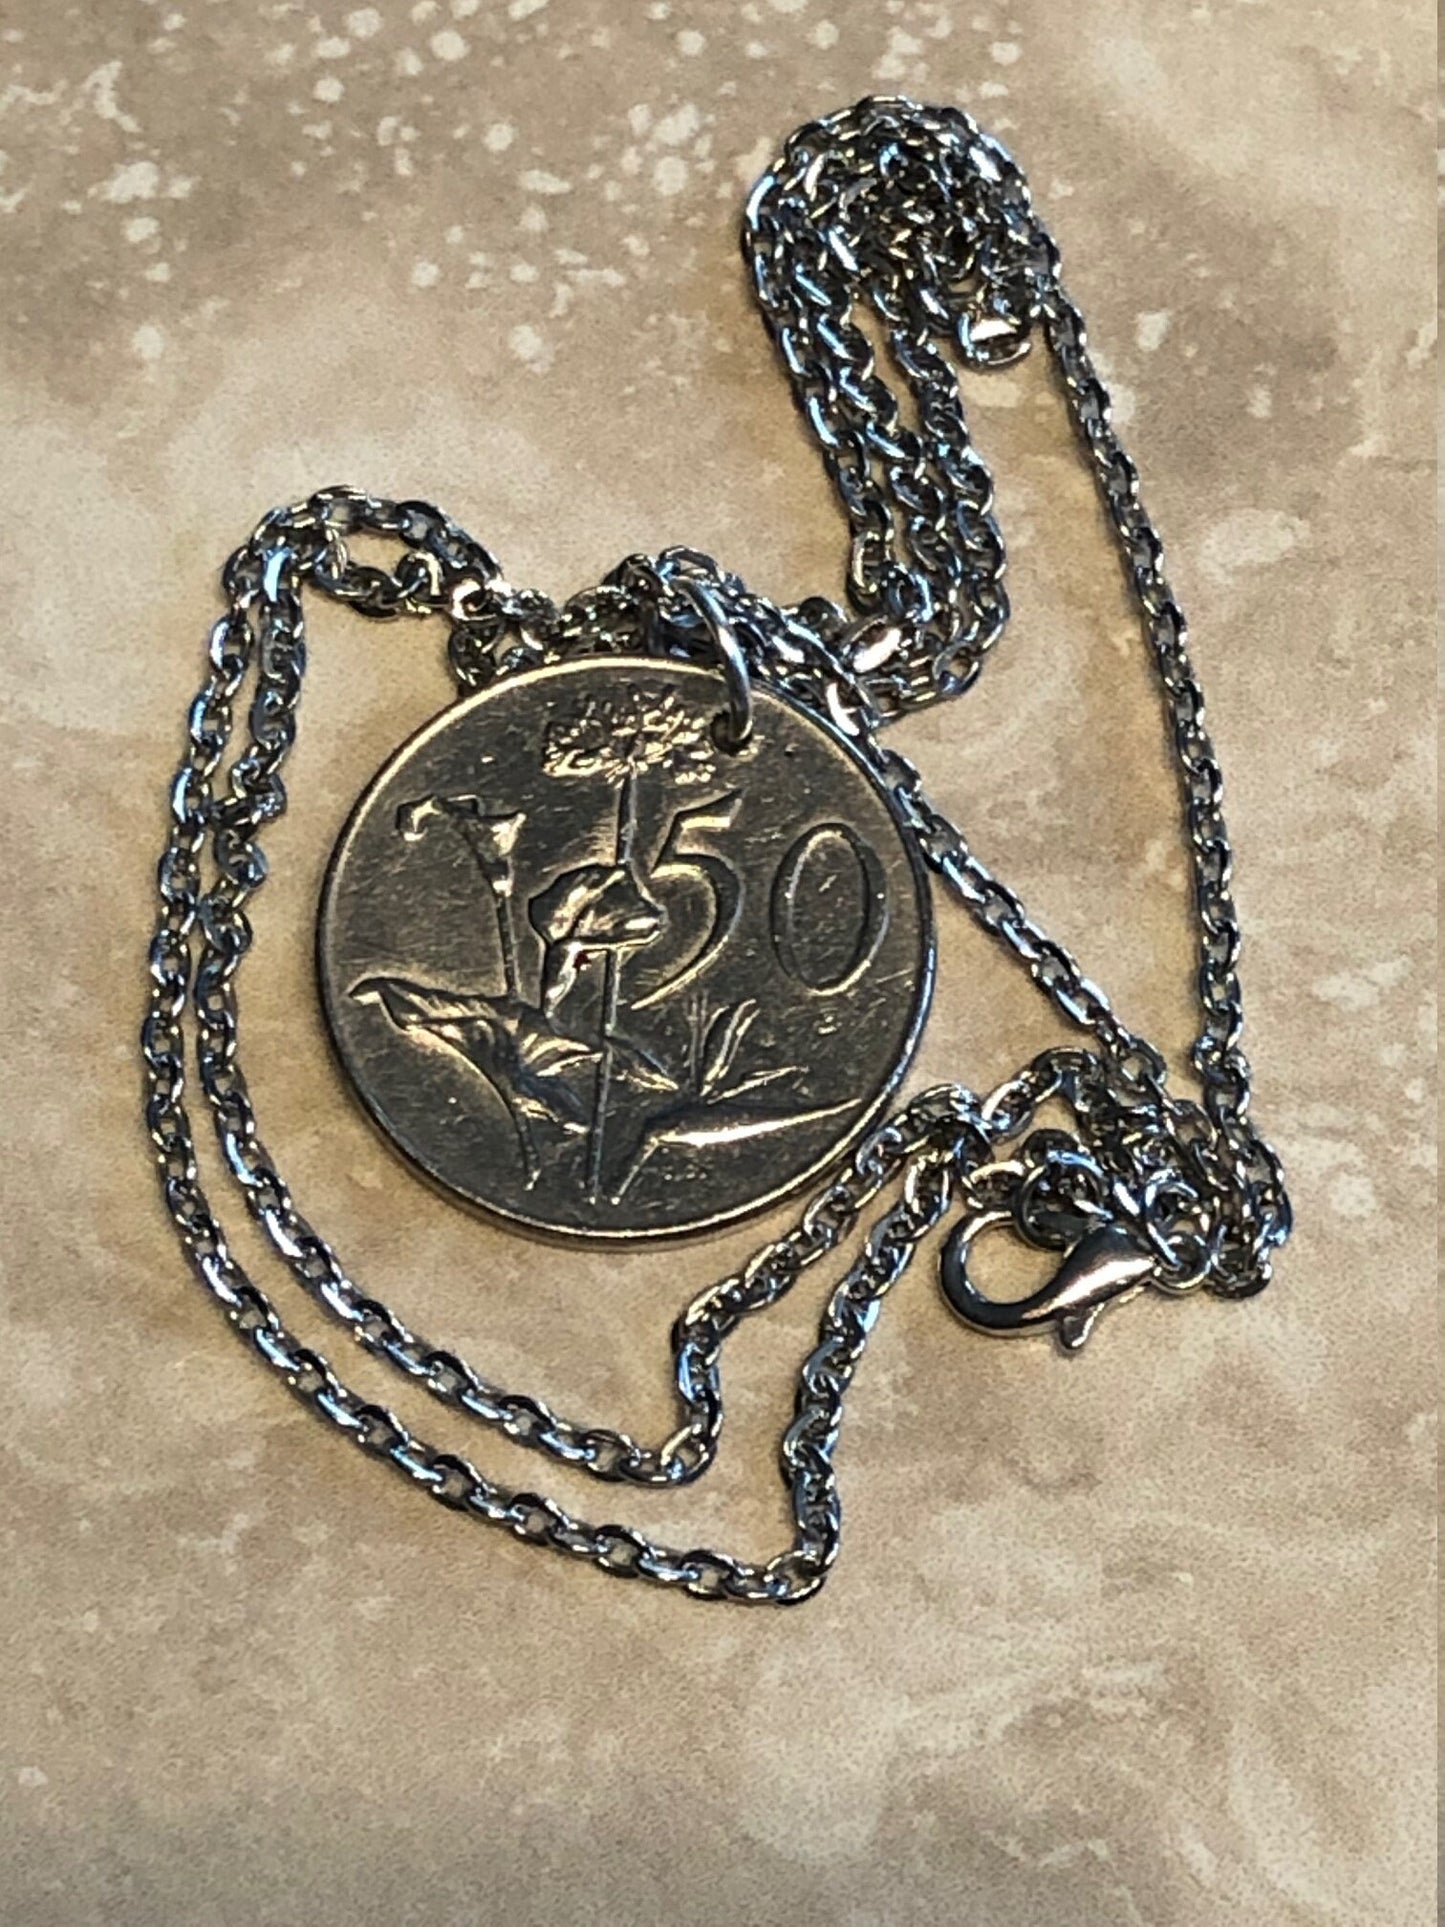 South Africa Coin Necklace 50 Cents African Pendant Personal Old Vintage Handmade Jewelry Gift Friend Charm For Him Her World Coin Collector